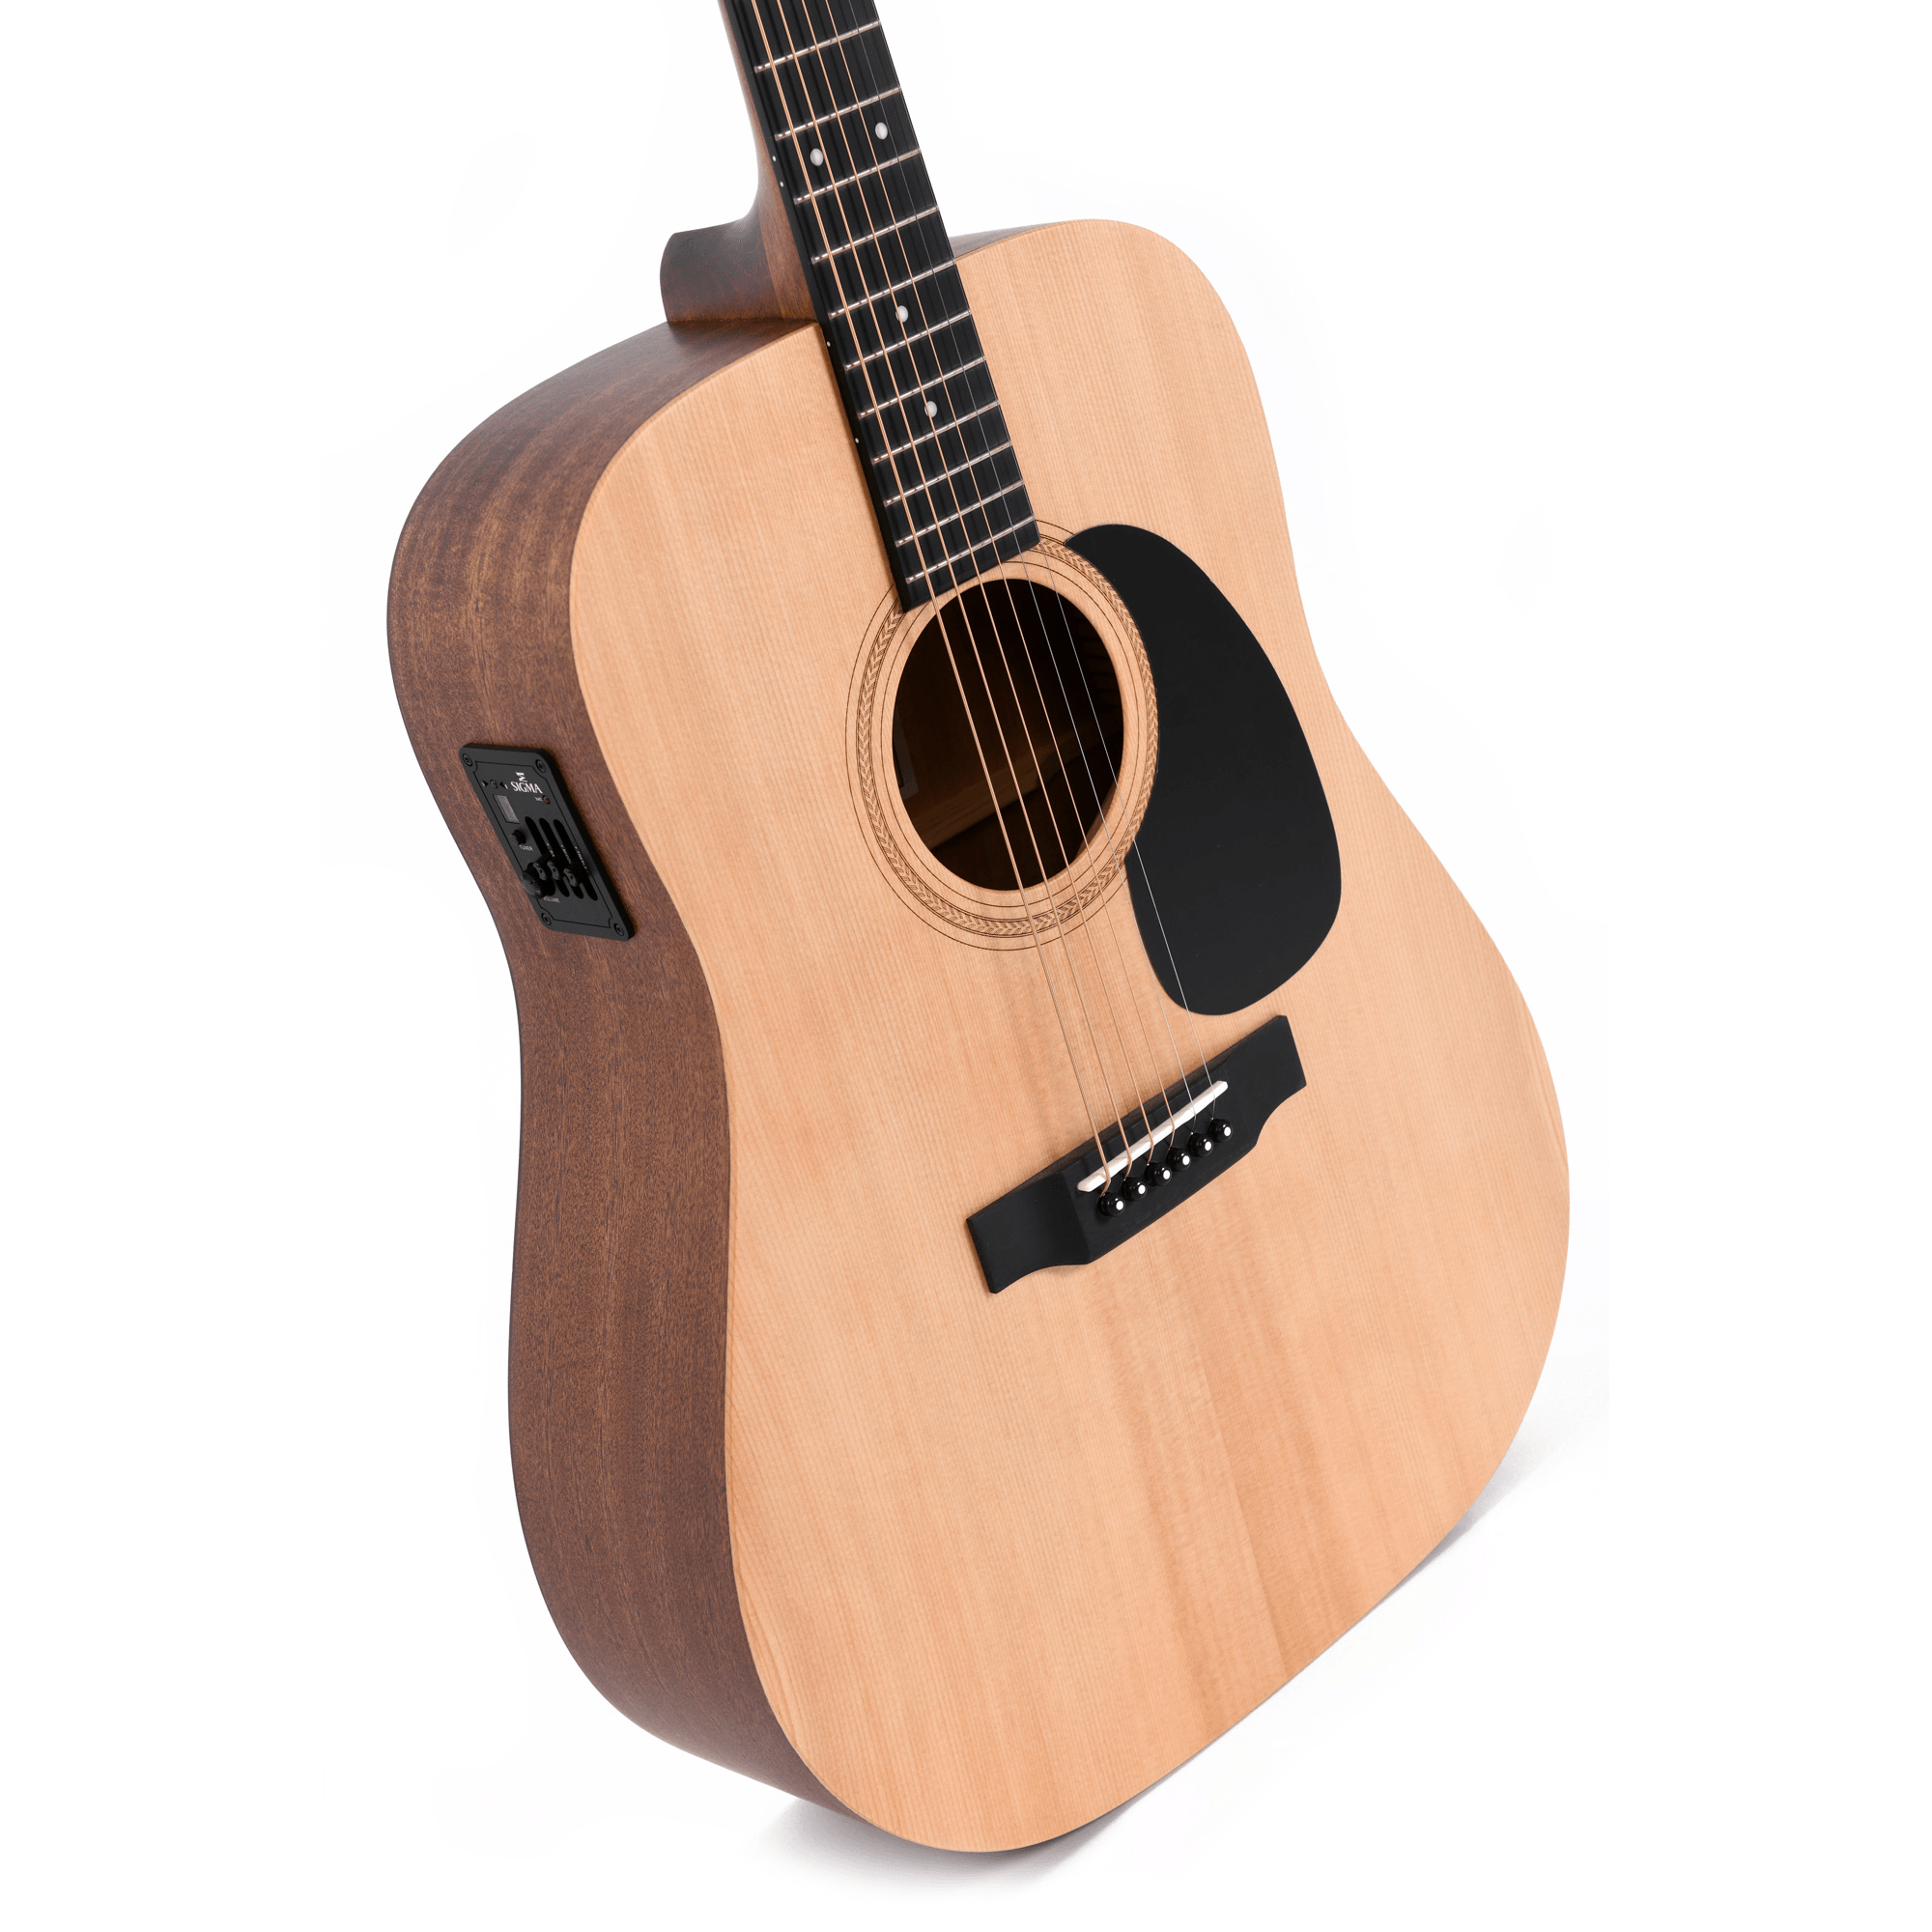 DME Dreadnought With Pickup - Guitars - Acoustic by Sigma at Muso's Stuff